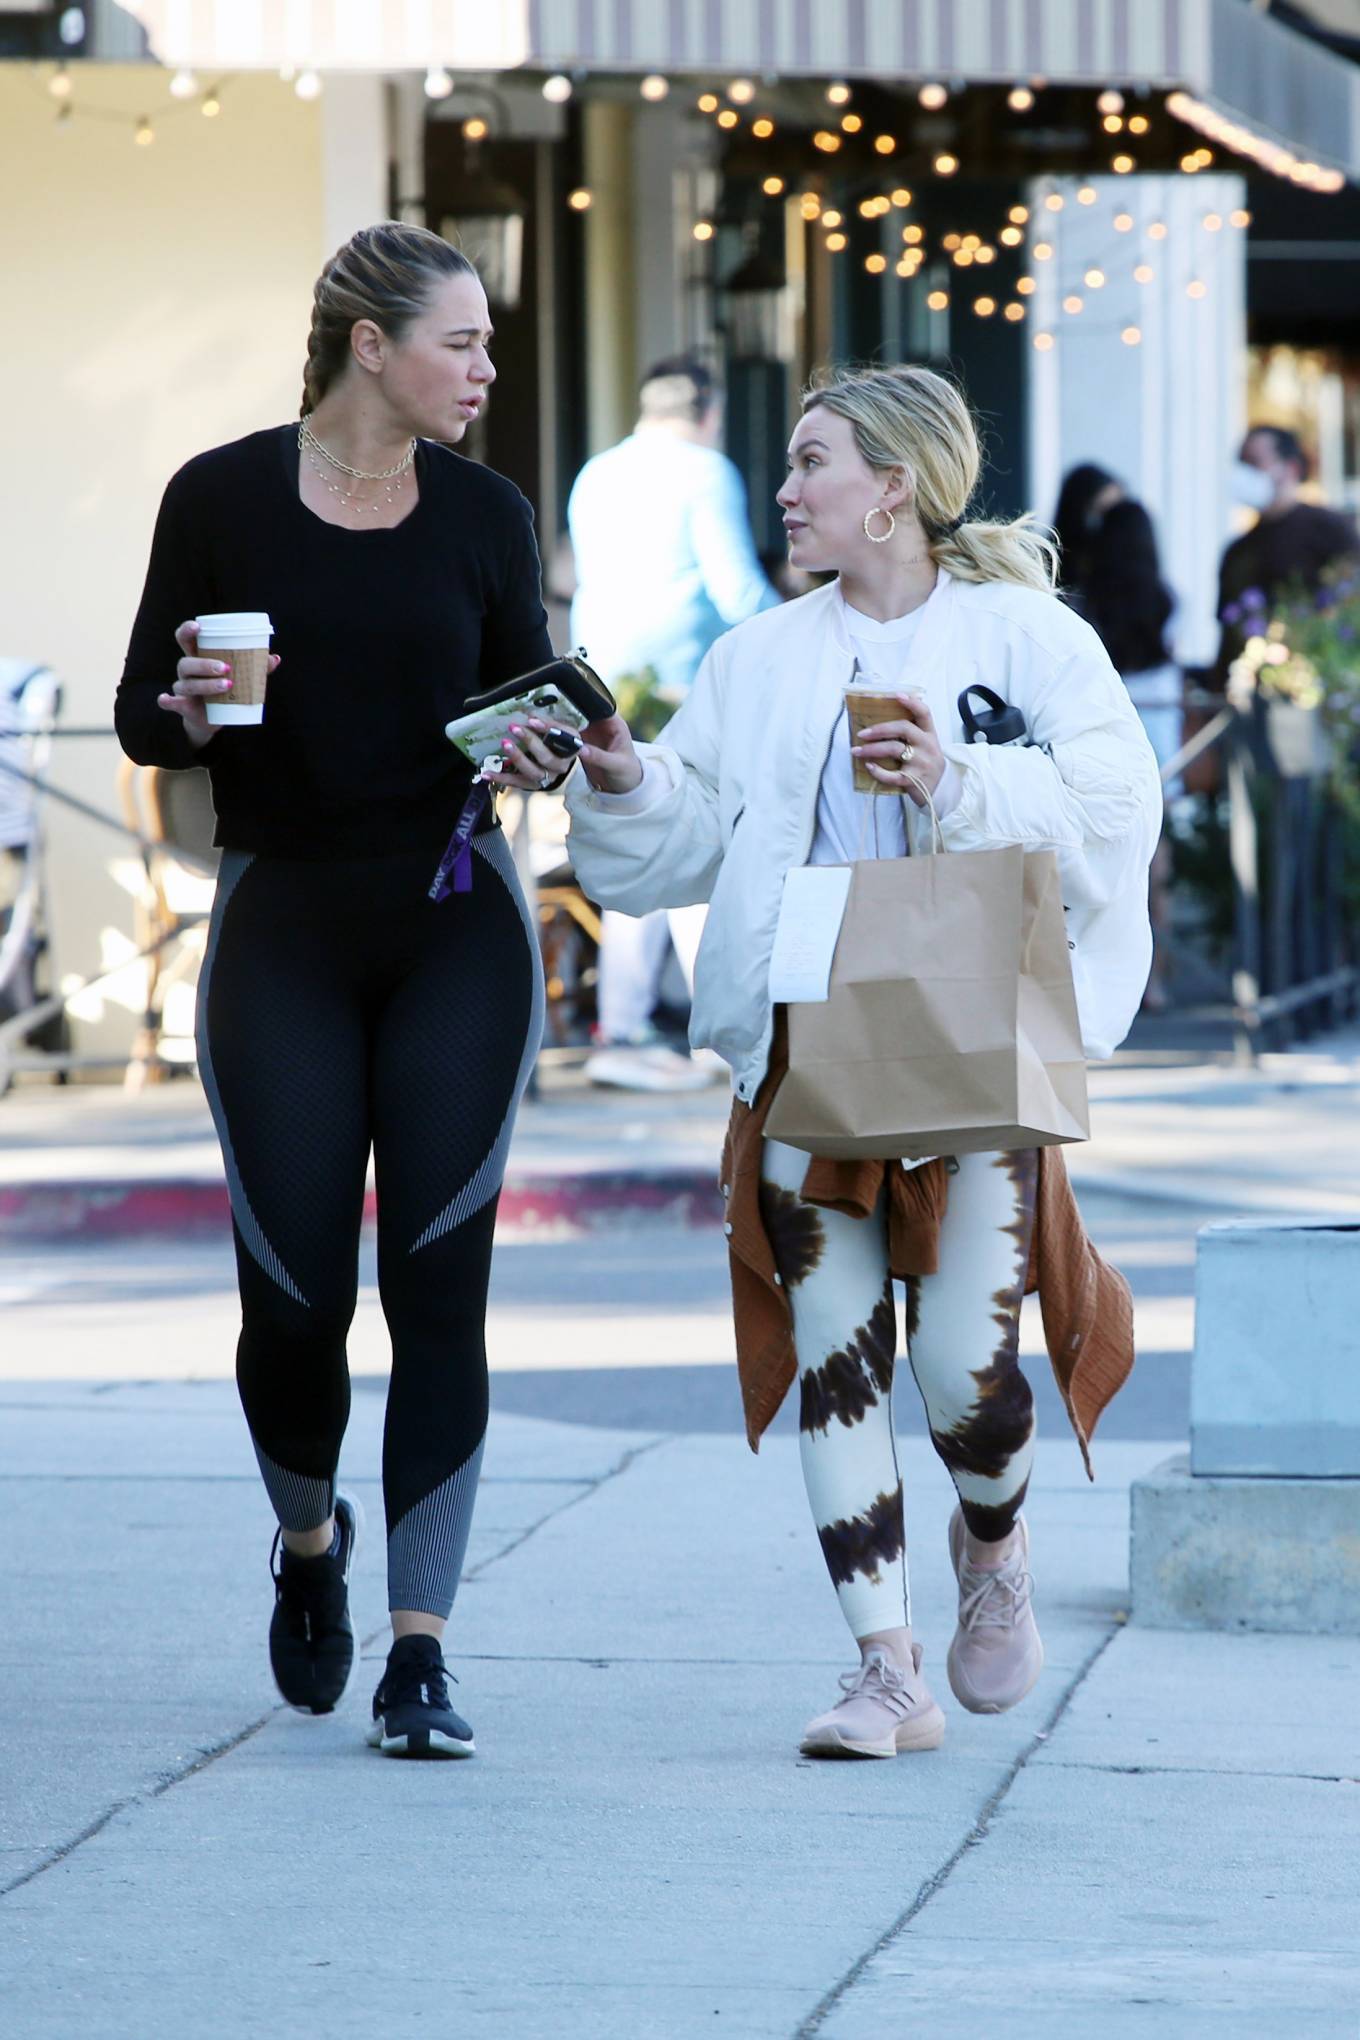 Hilary Duff - Getting coffee from Sweet Butter after a workout session in Los Angeles